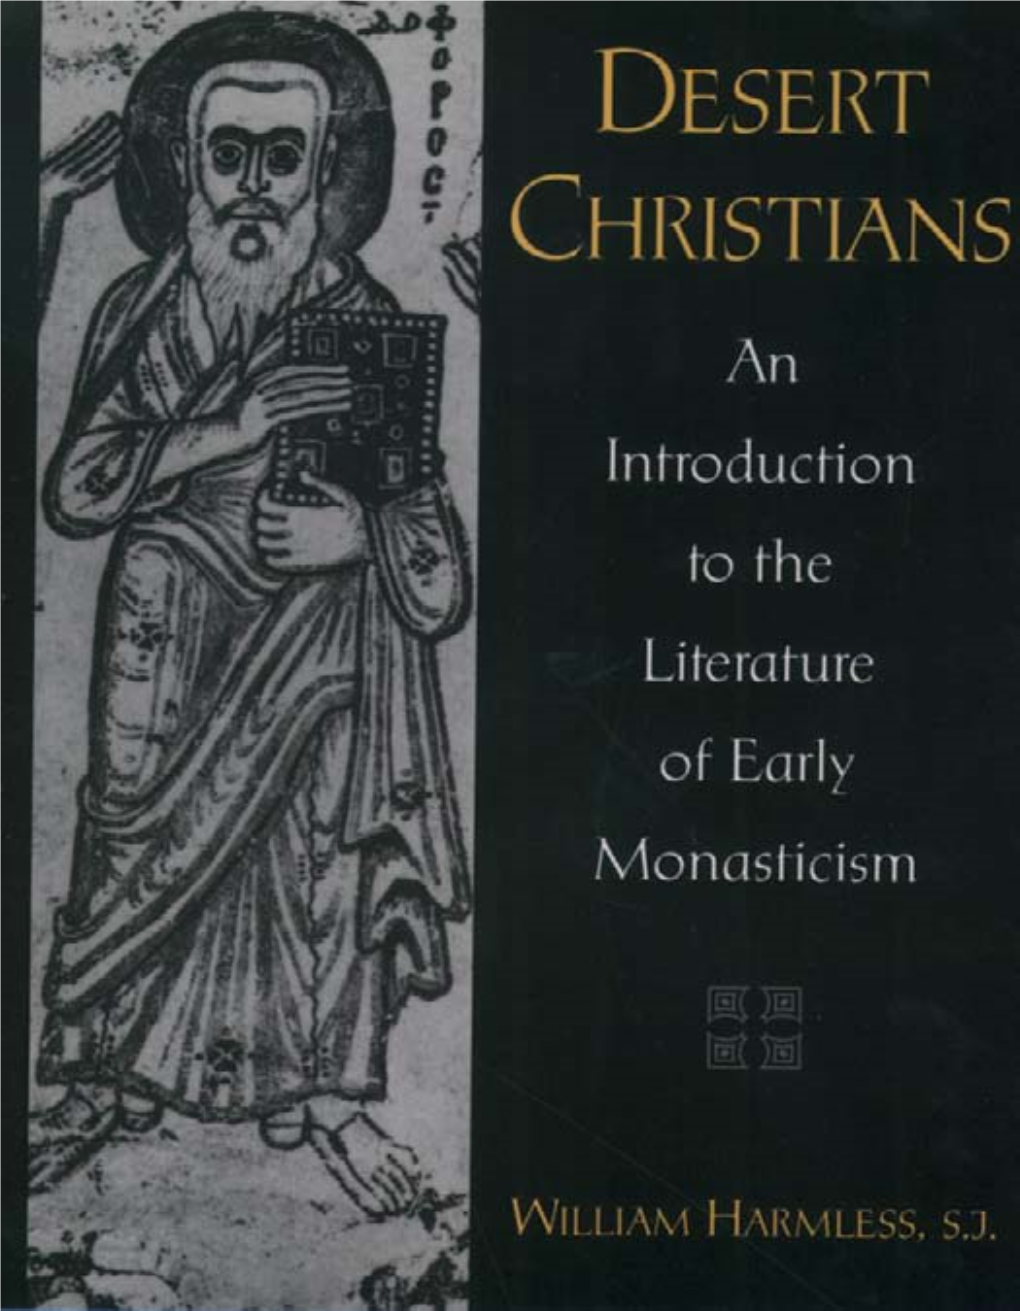 Desert Christians : an Introduction to the Literature of Early Monasticism / William Harmless